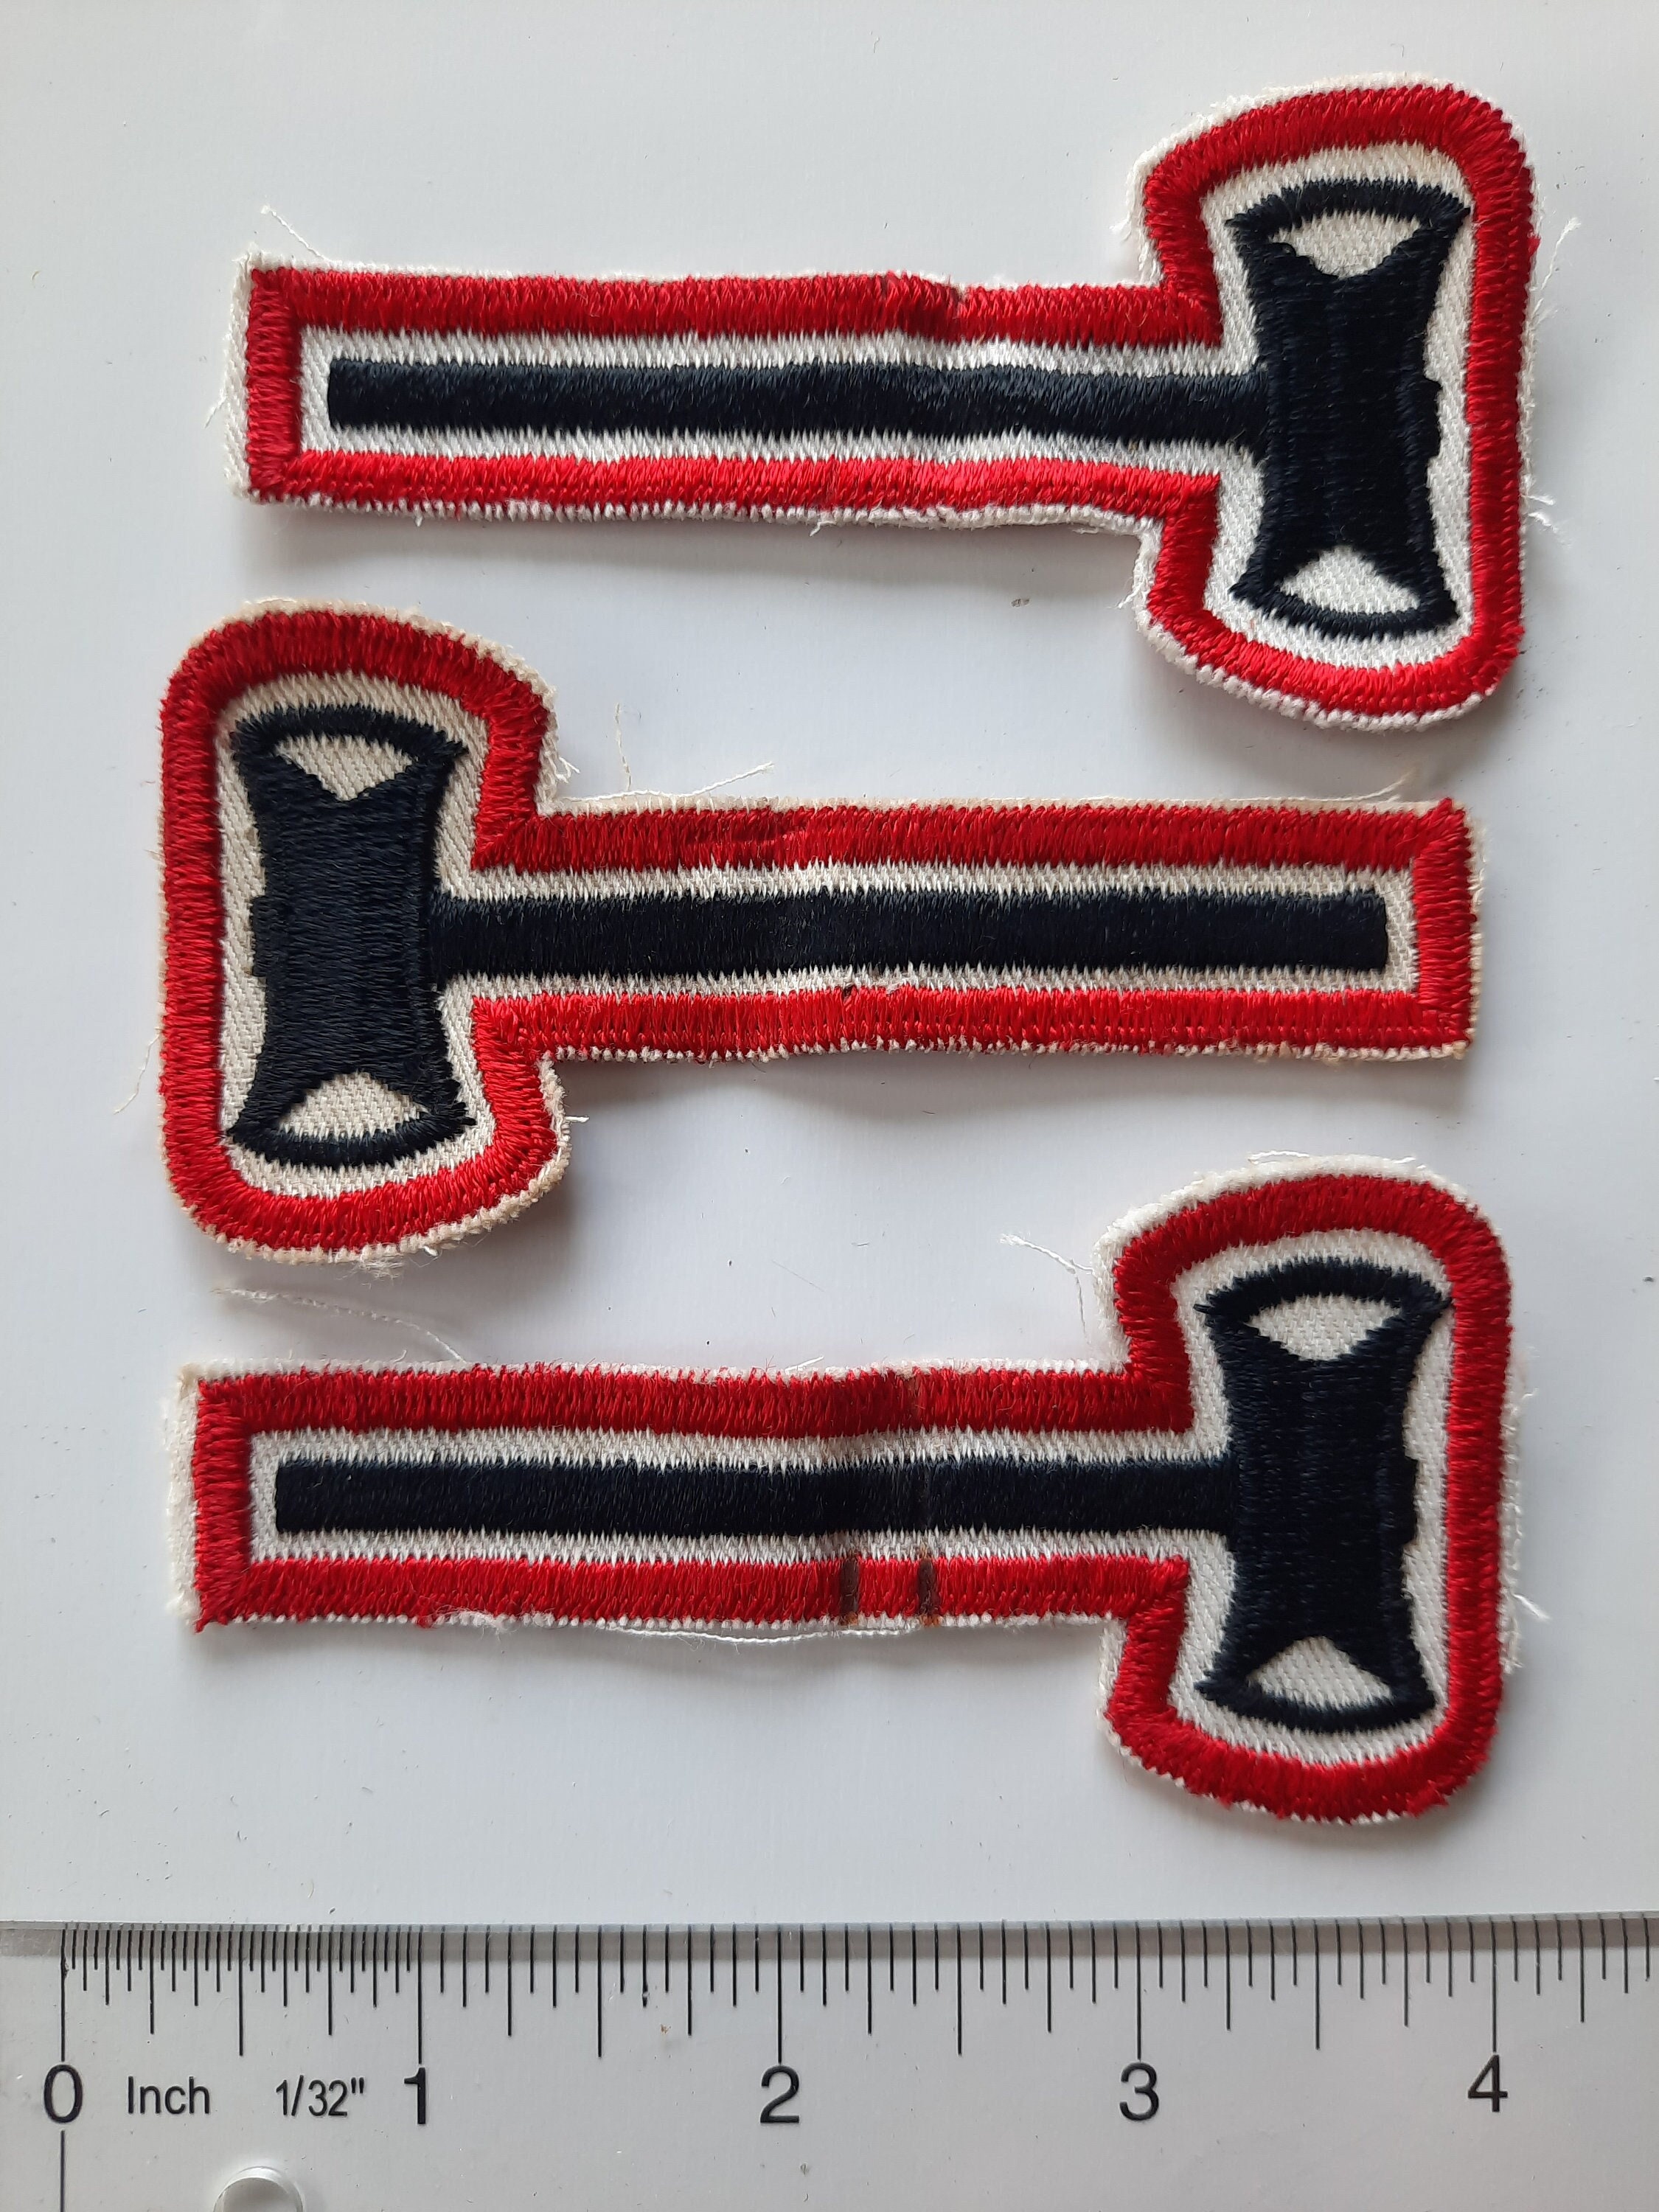 Vintage 1960 Sew On Cloth Patch, Patches Lot of (3): Boys Scouts Of  America, B.S.A. Tomahawk, Hand Axe, Paul Bunyan Award Patches, 3.5